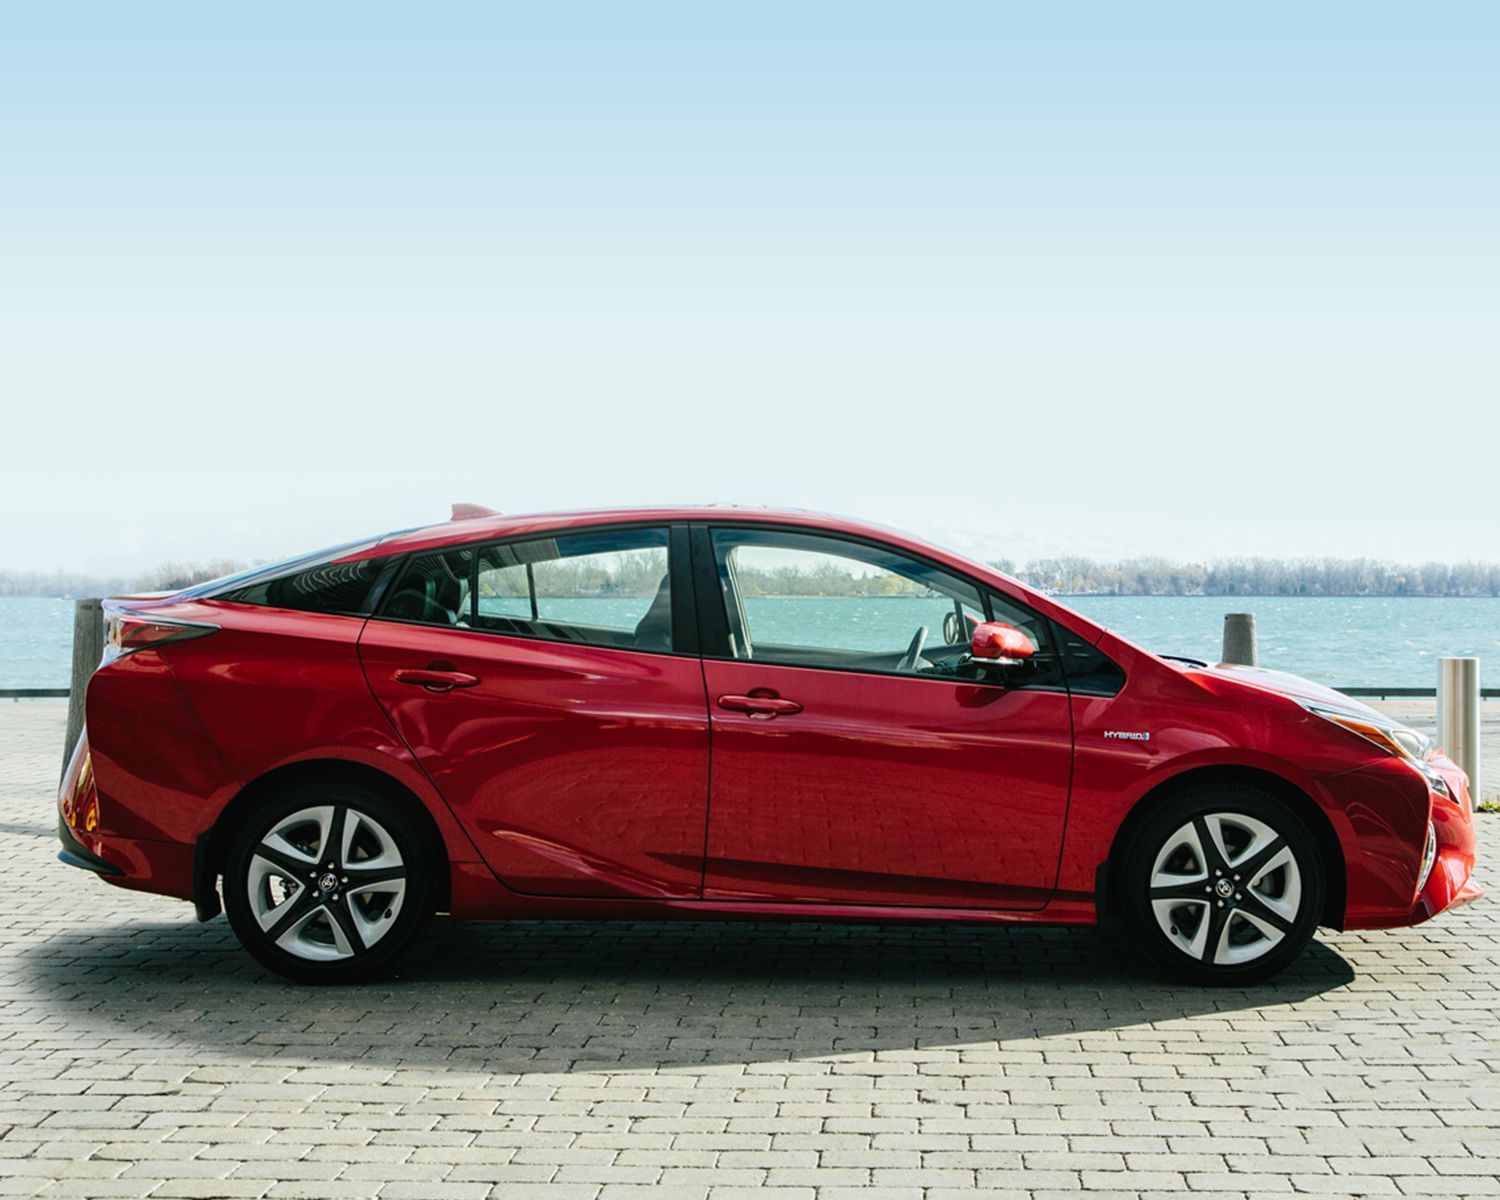 2018 Toyota Prius Sedan: Prices and Specifications in Longueuil at Longueuil Toyota